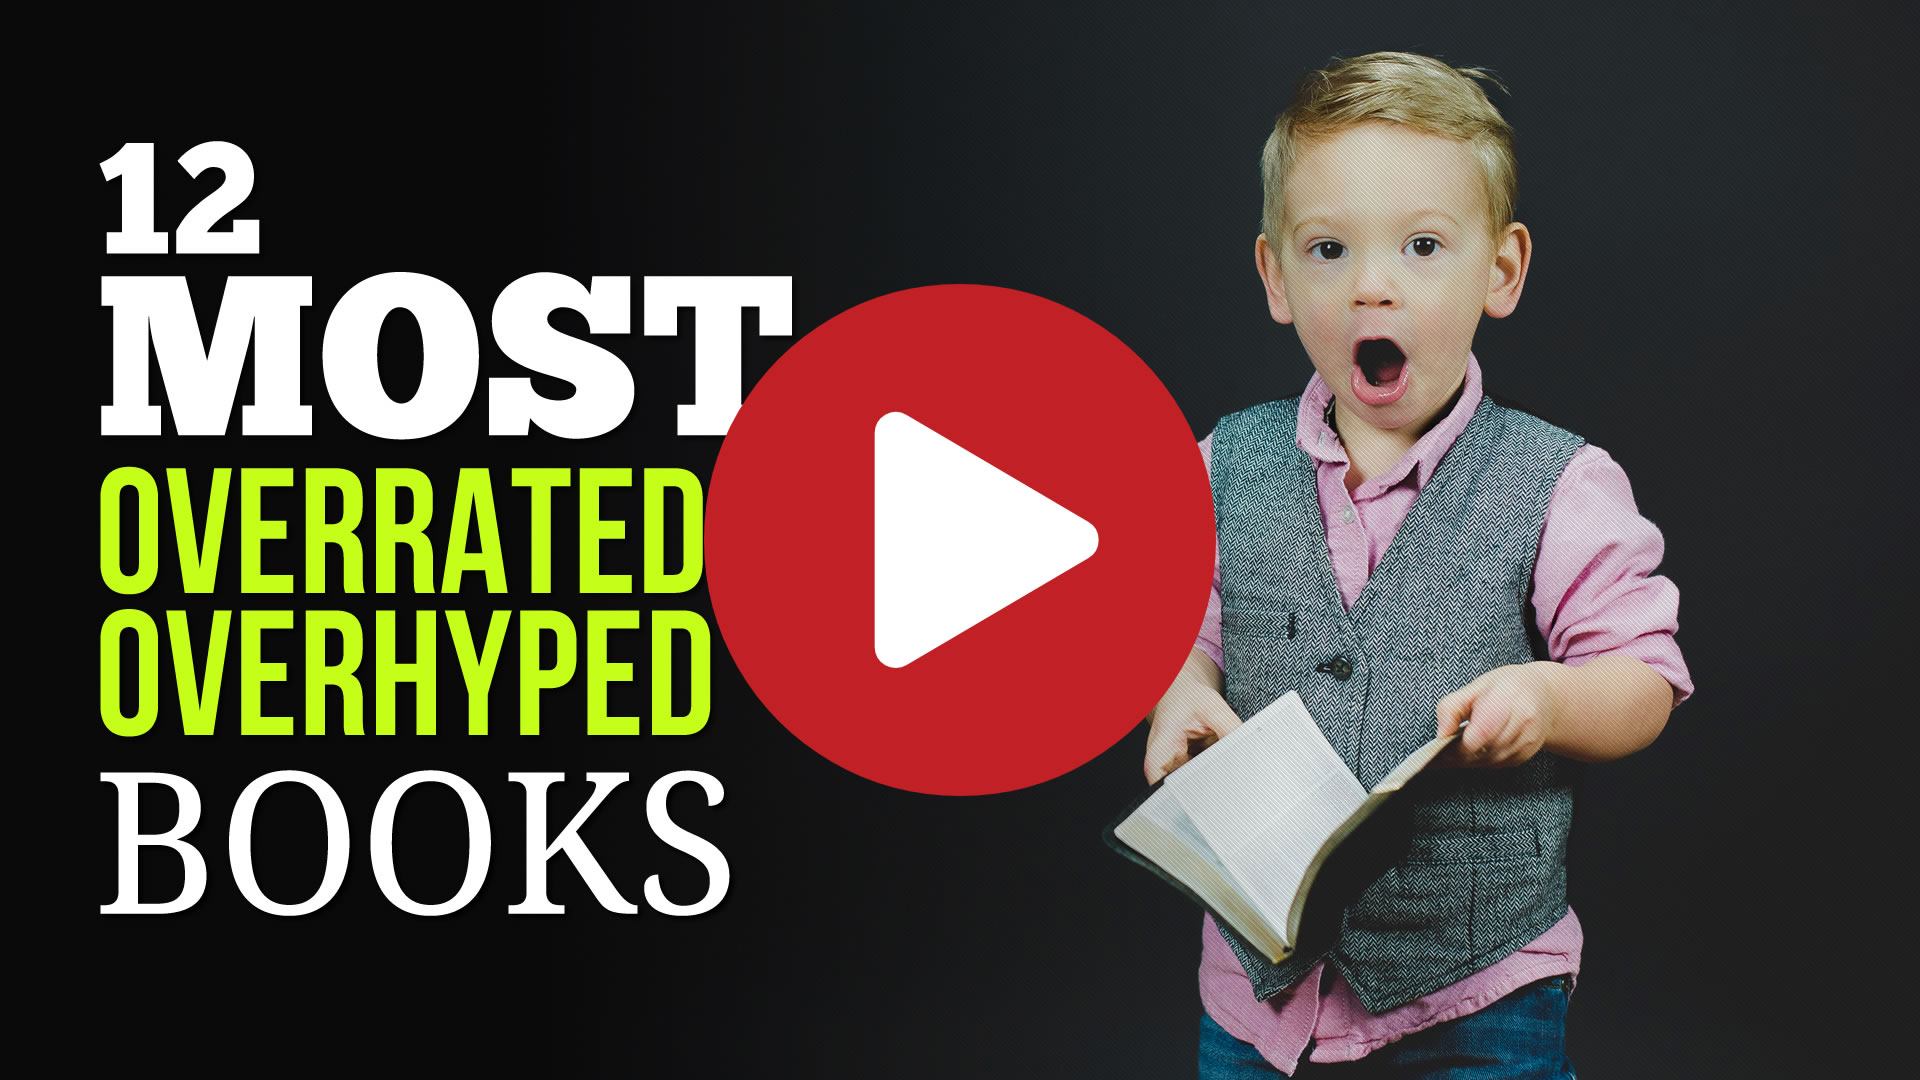 12 Most Overrated & Overhyped Books That You Just Have to Read Yourself to Know